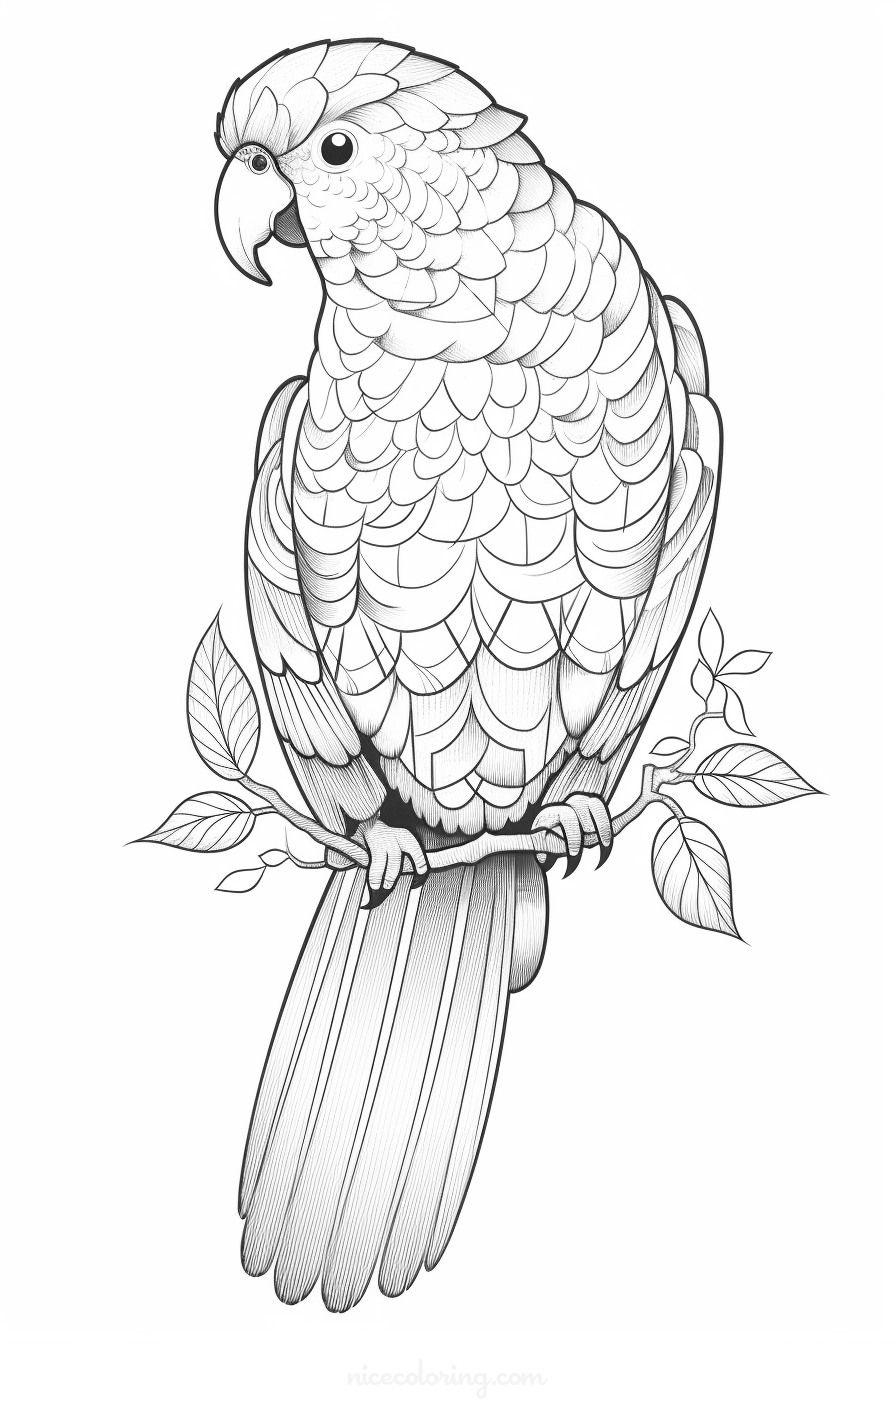 bird in a forest scene coloring page